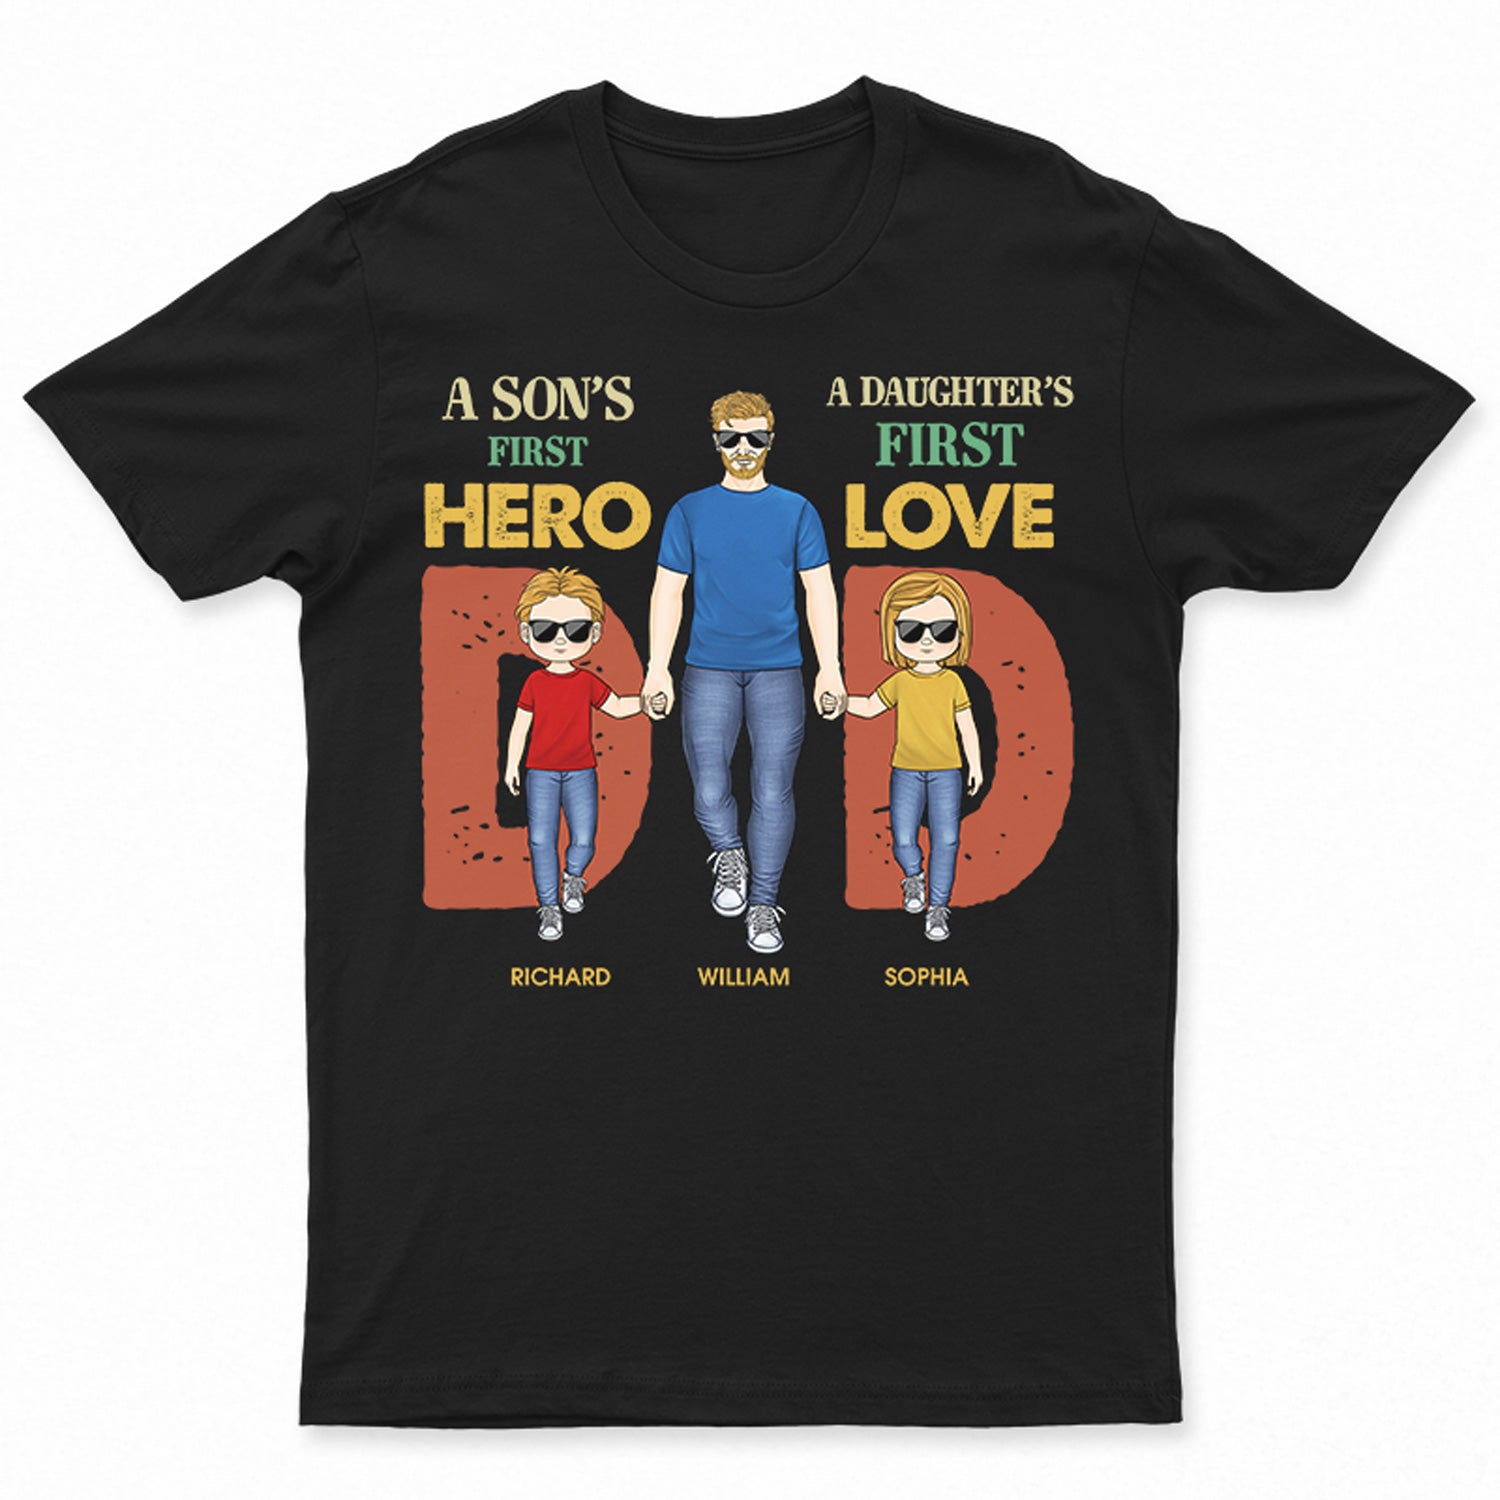 Son's First Hero Daughter's First Love - Gift For Dad, Father - Personalized Custom T Shirt